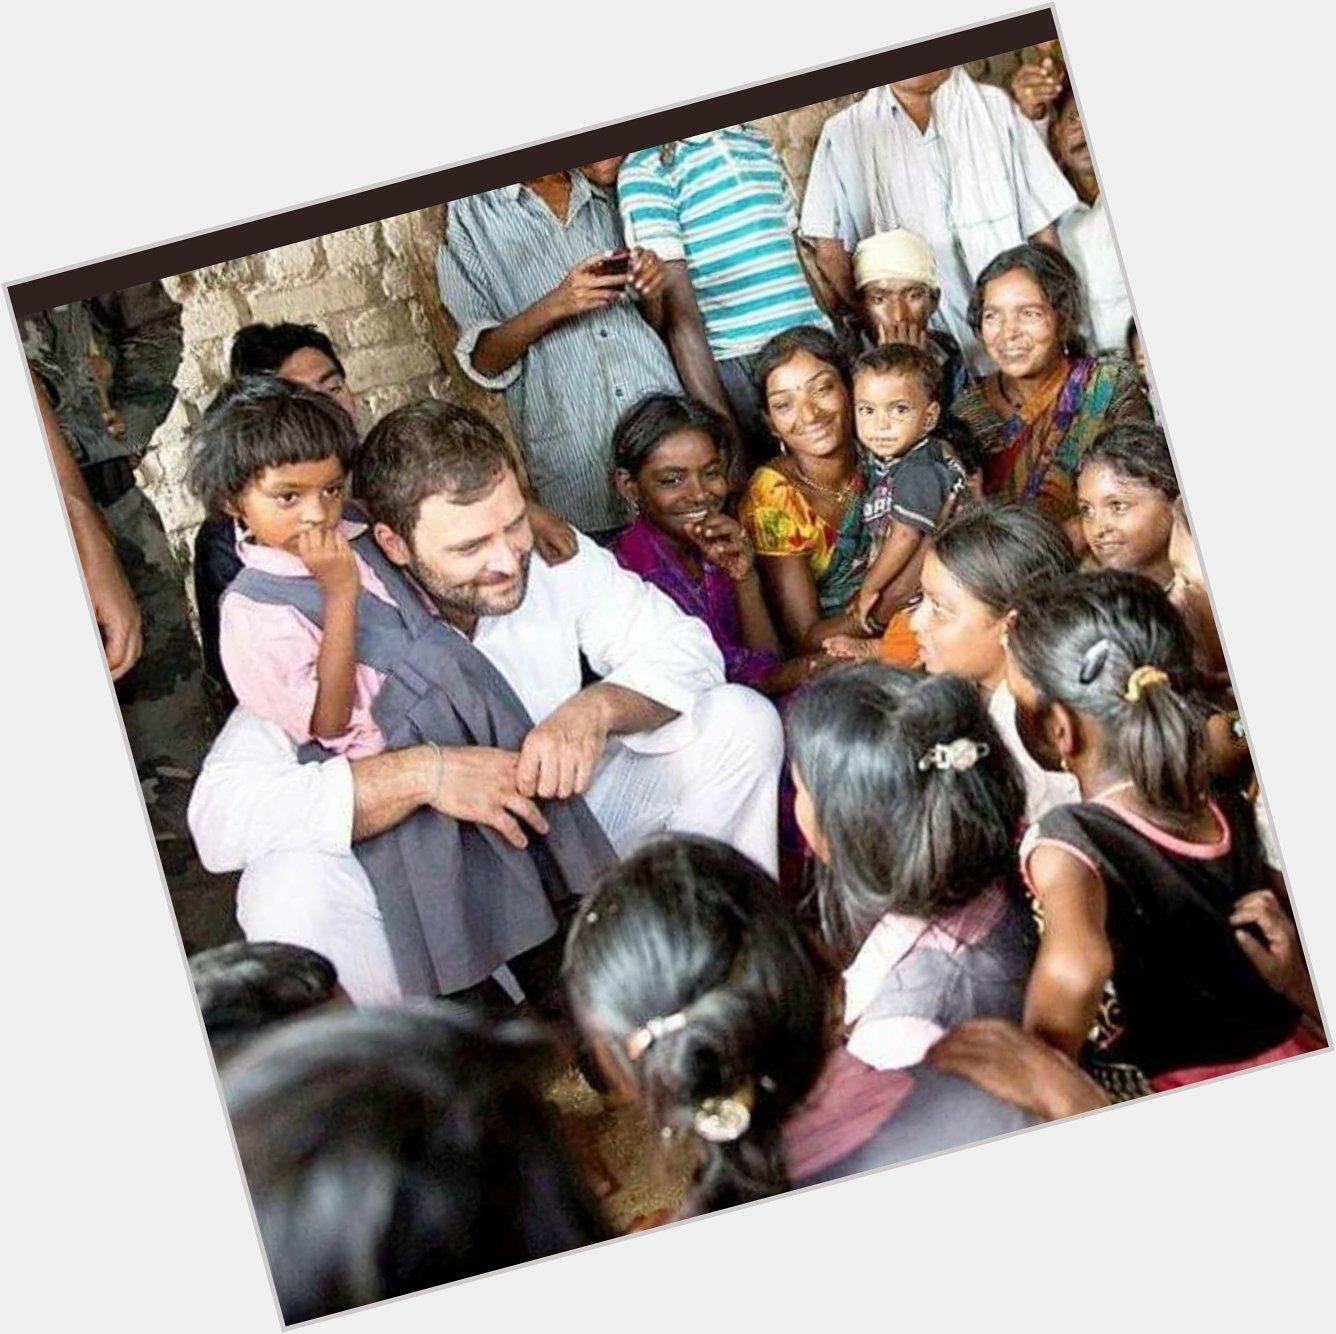 Happy birthday prince Rahul brother !!!
Yes, being prince is really hard !! 